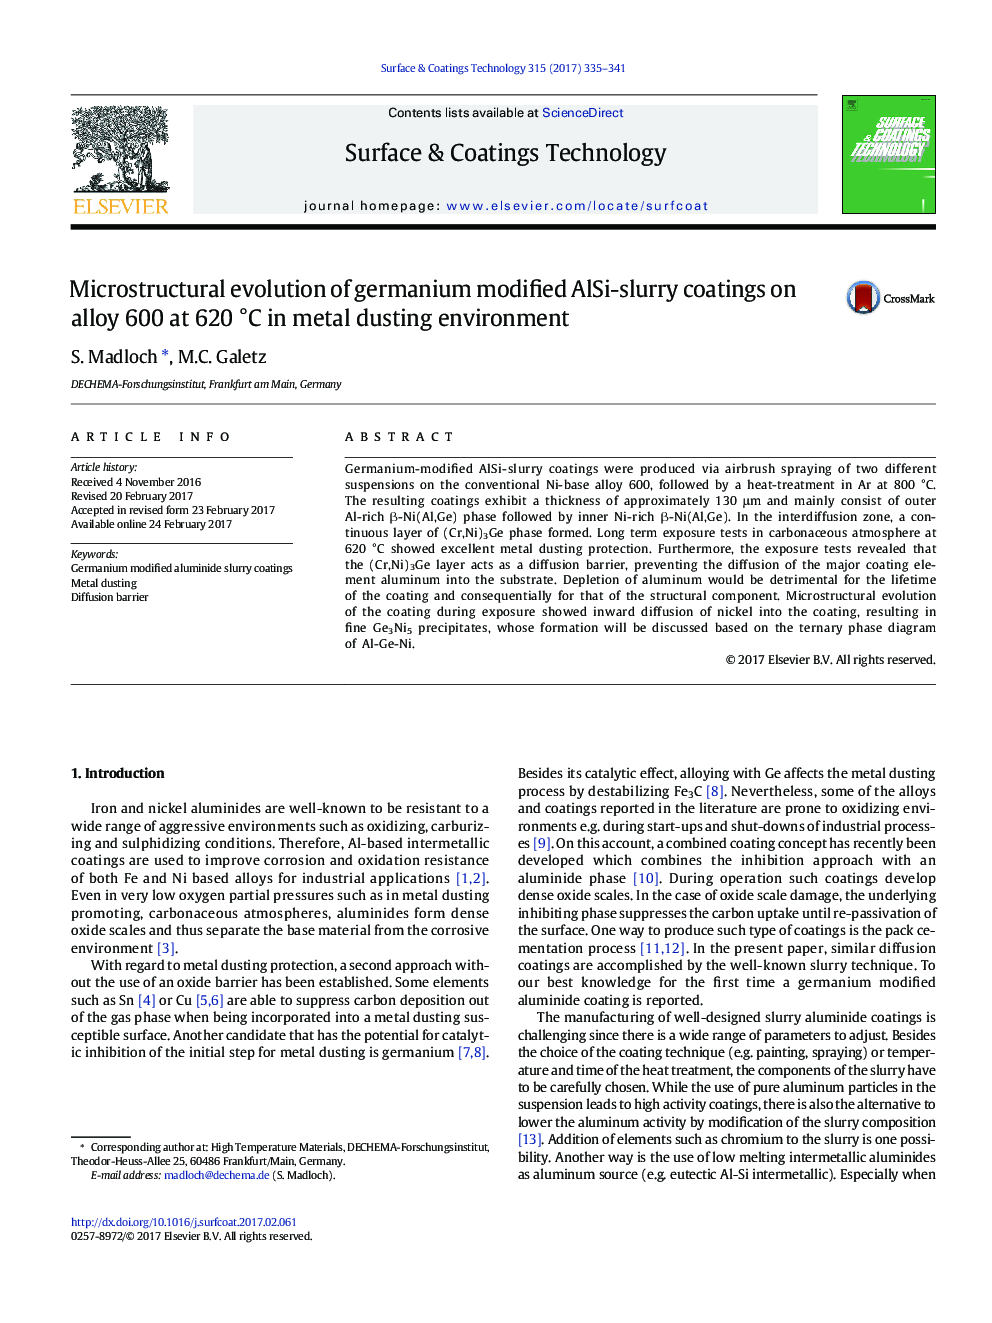 Microstructural evolution of germanium modified AlSi-slurry coatings on alloy 600 at 620Â Â°C in metal dusting environment